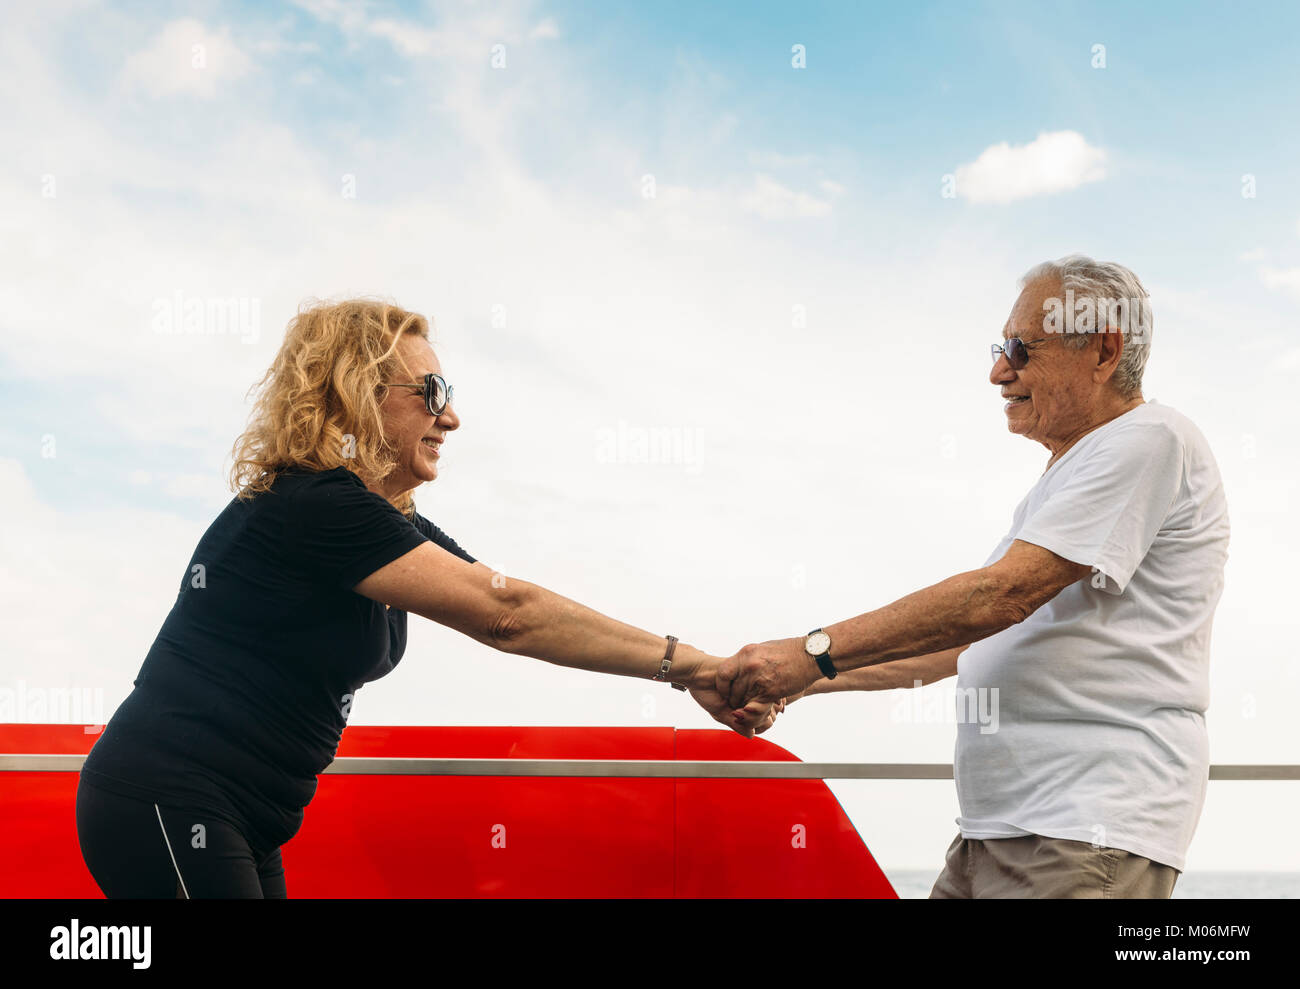 Model Released - Mature heterosexual couple stretching together against blue sky outdoors Stock Photo